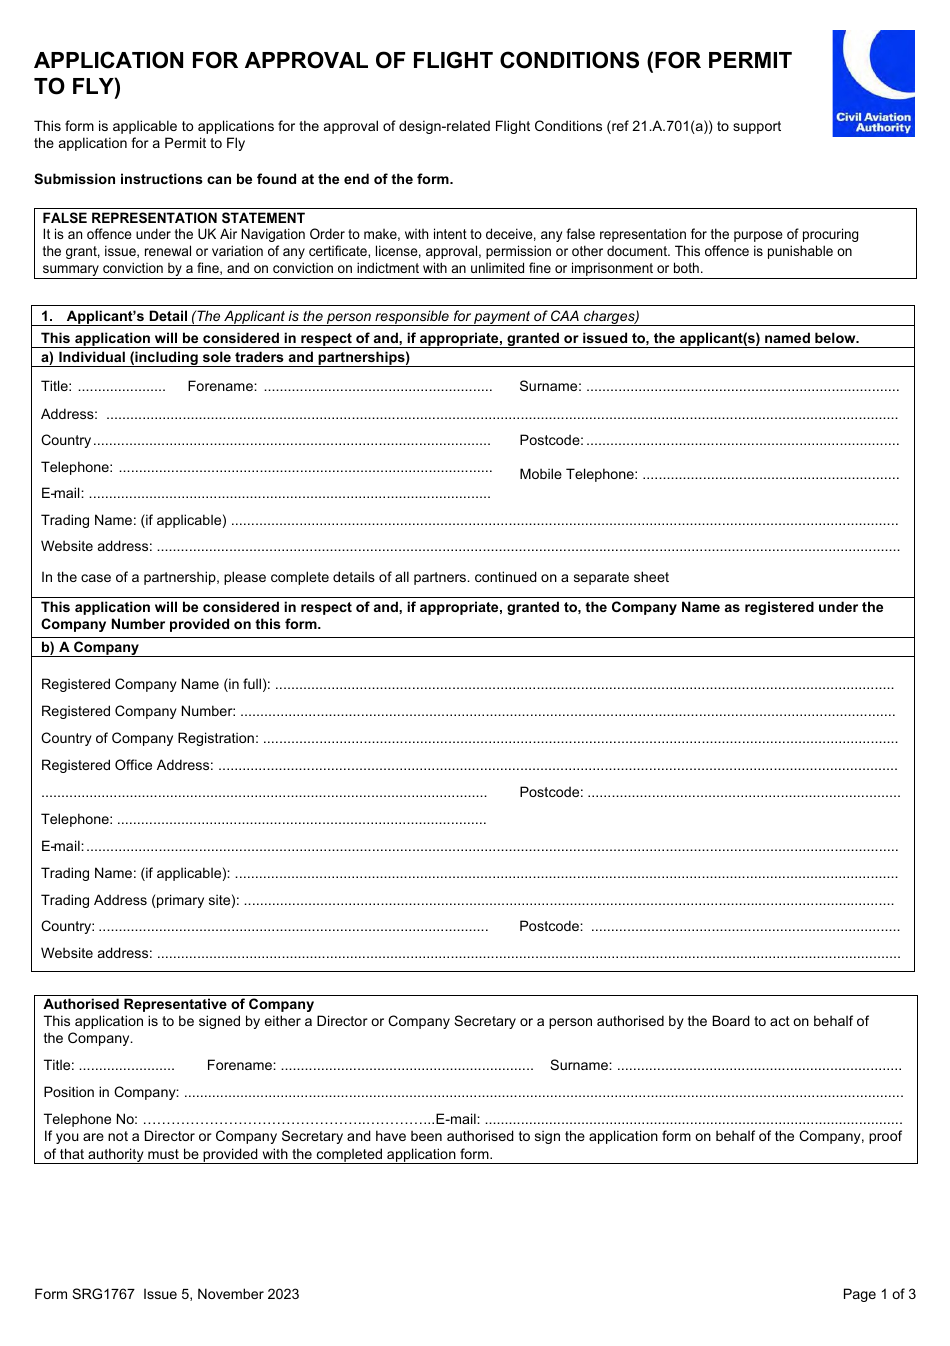 Form SRG1767 Application for Approval of Flight Conditions (For Permit to Fly) - United Kingdom, Page 1